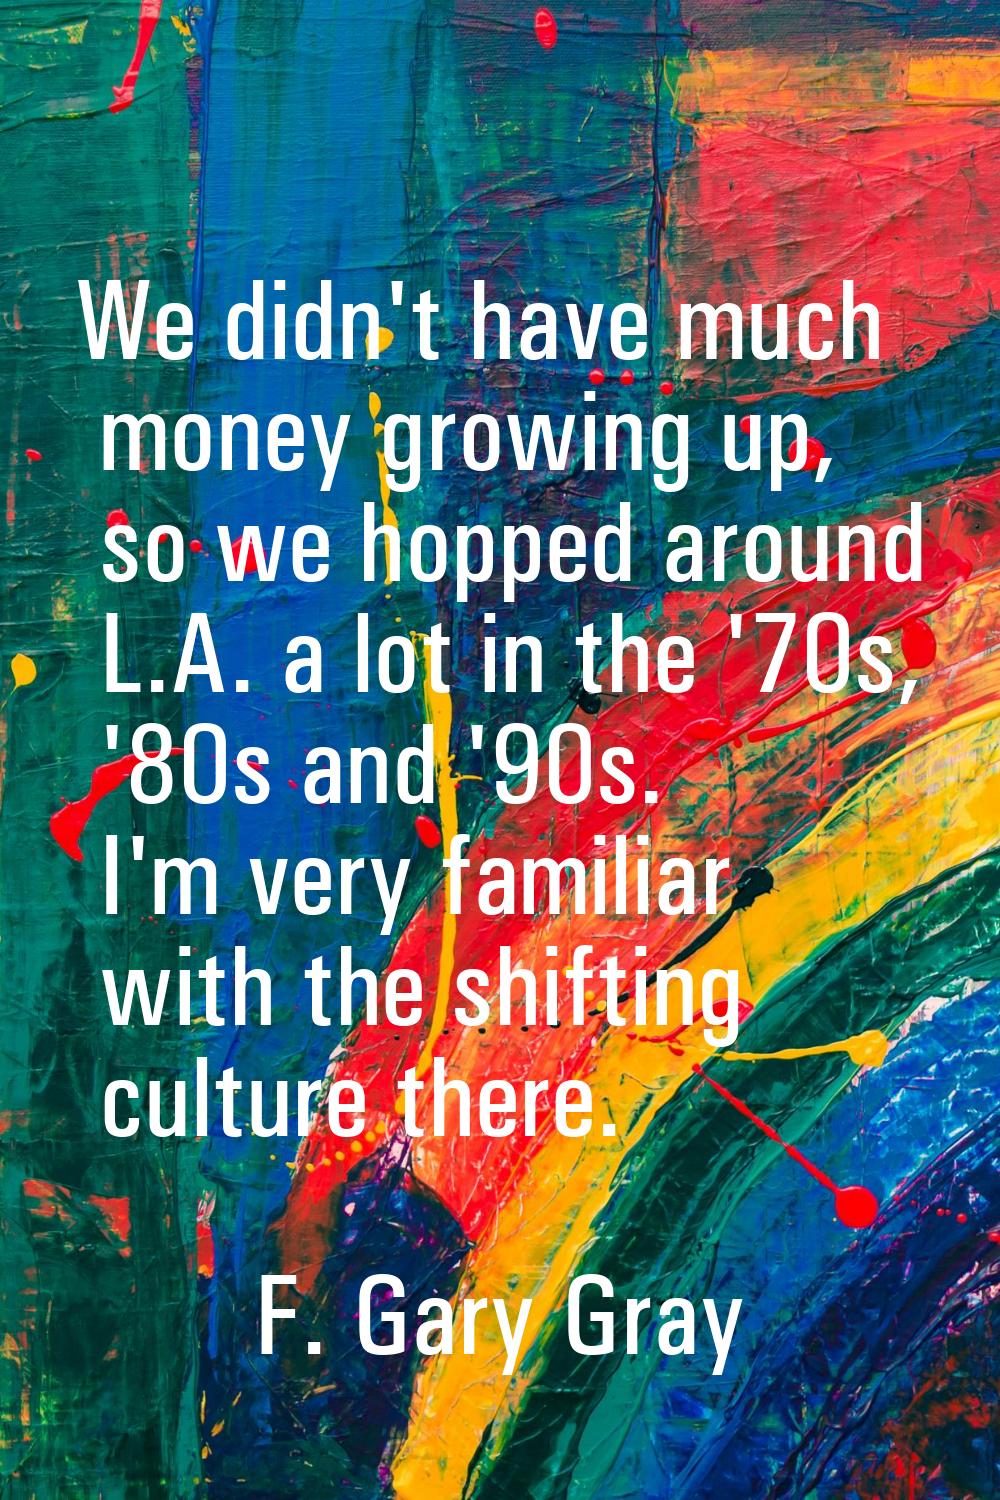 We didn't have much money growing up, so we hopped around L.A. a lot in the '70s, '80s and '90s. I'